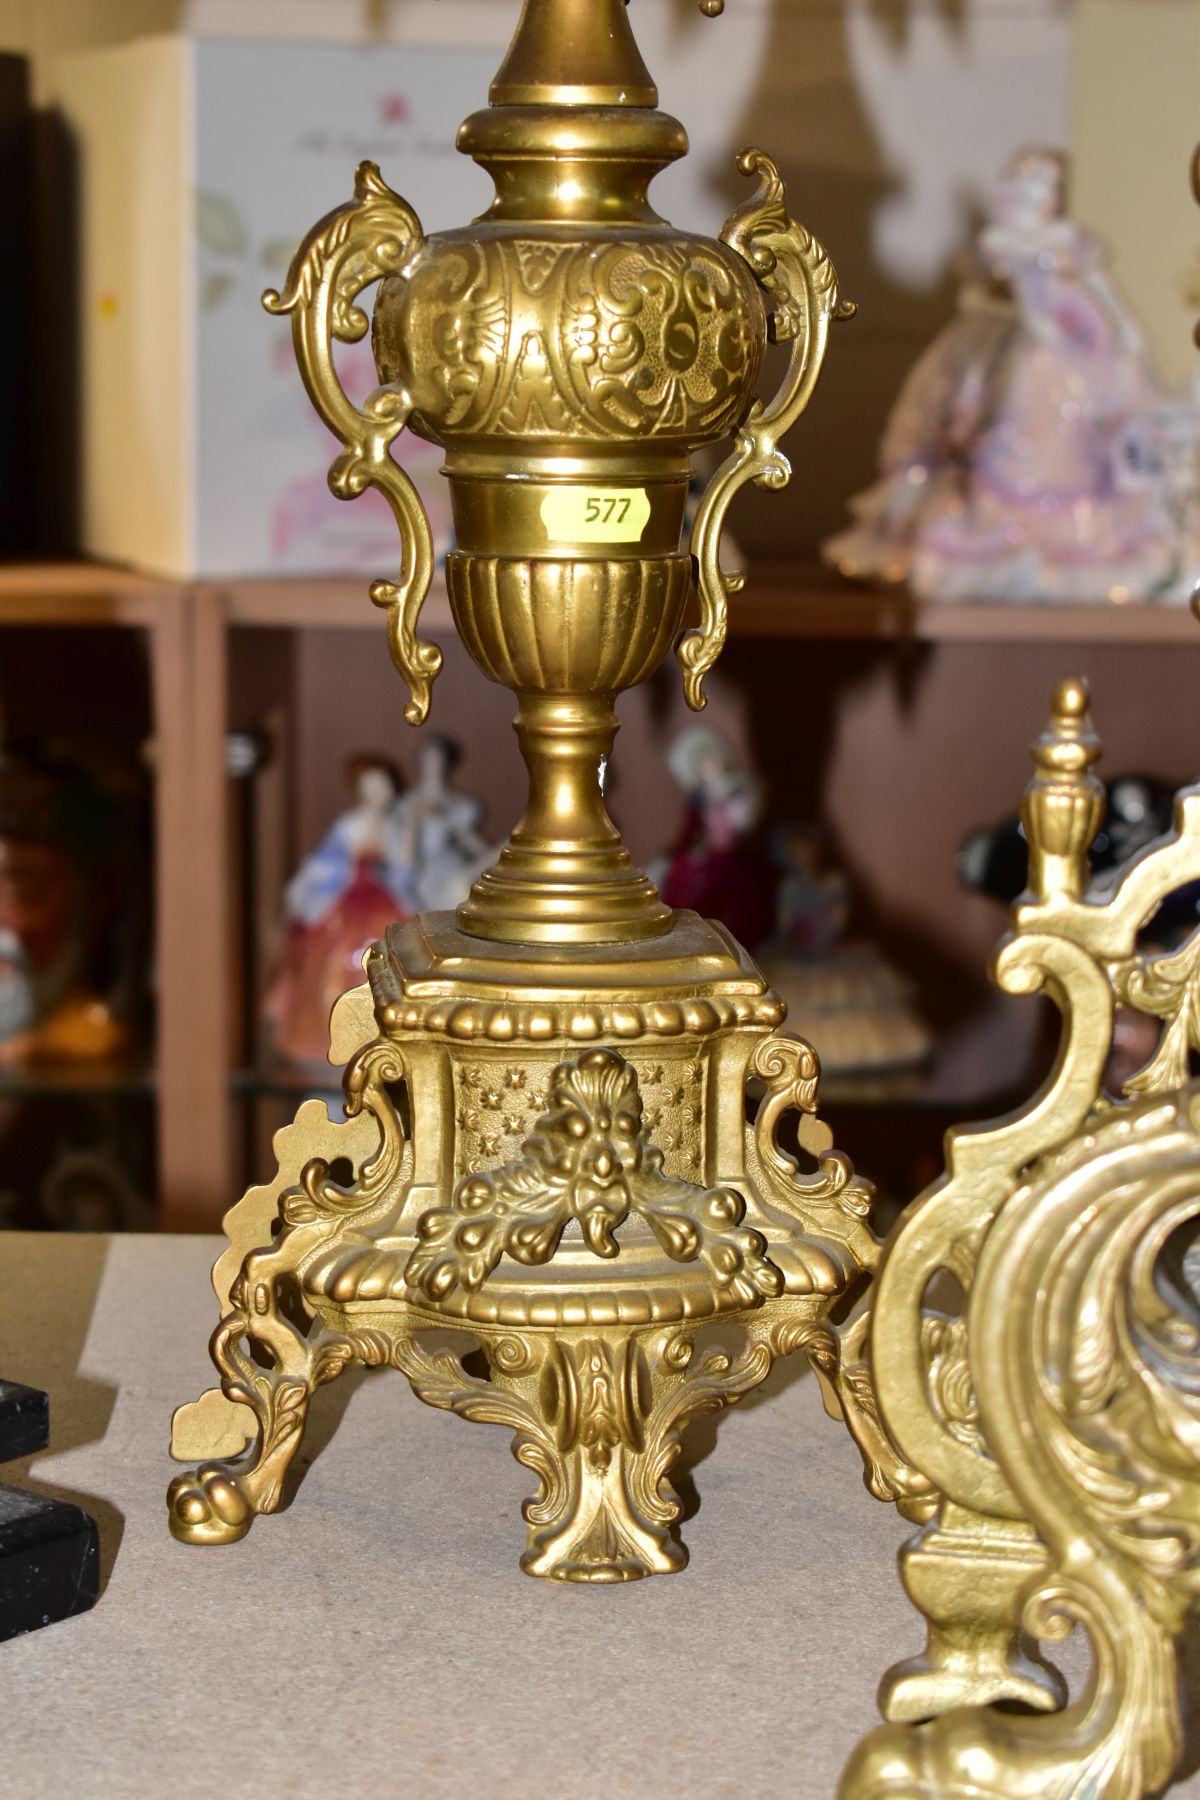 A REPRODUCTION BRASS CLOCK GARNITURE, the clock with ornate cast brass case with twin handled urn - Image 4 of 9